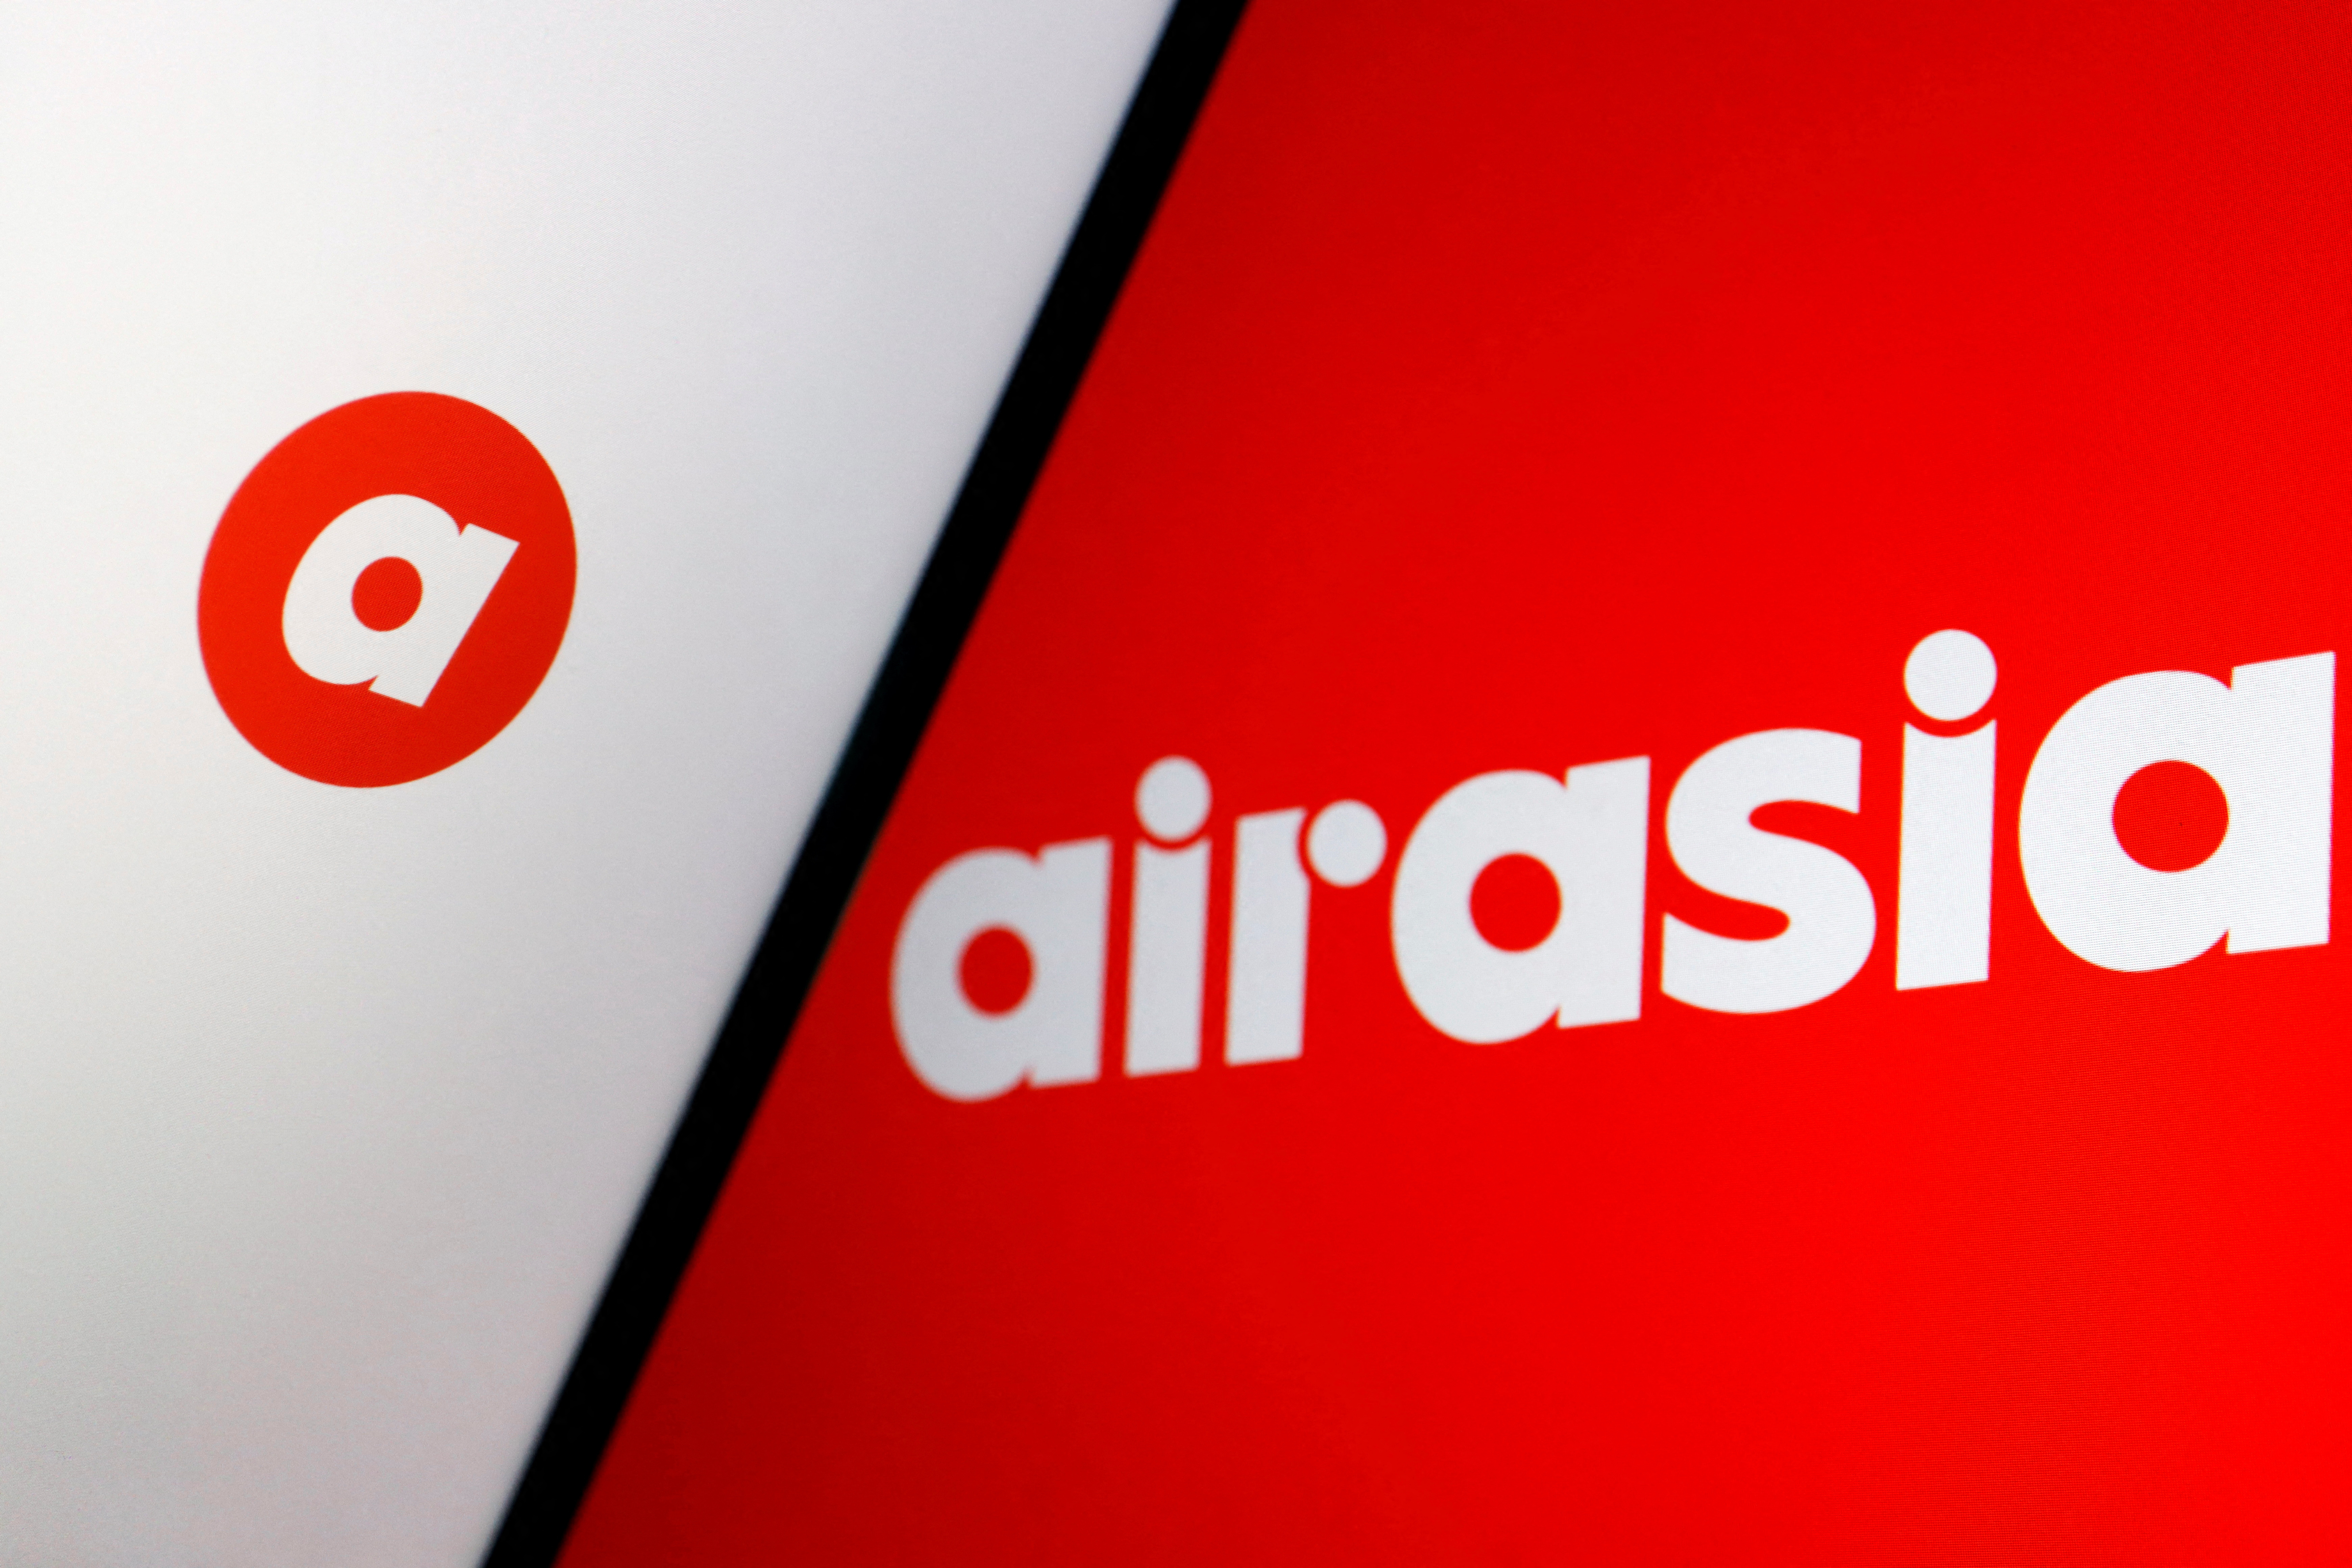 Illustration picture of Capital A's AirAsia